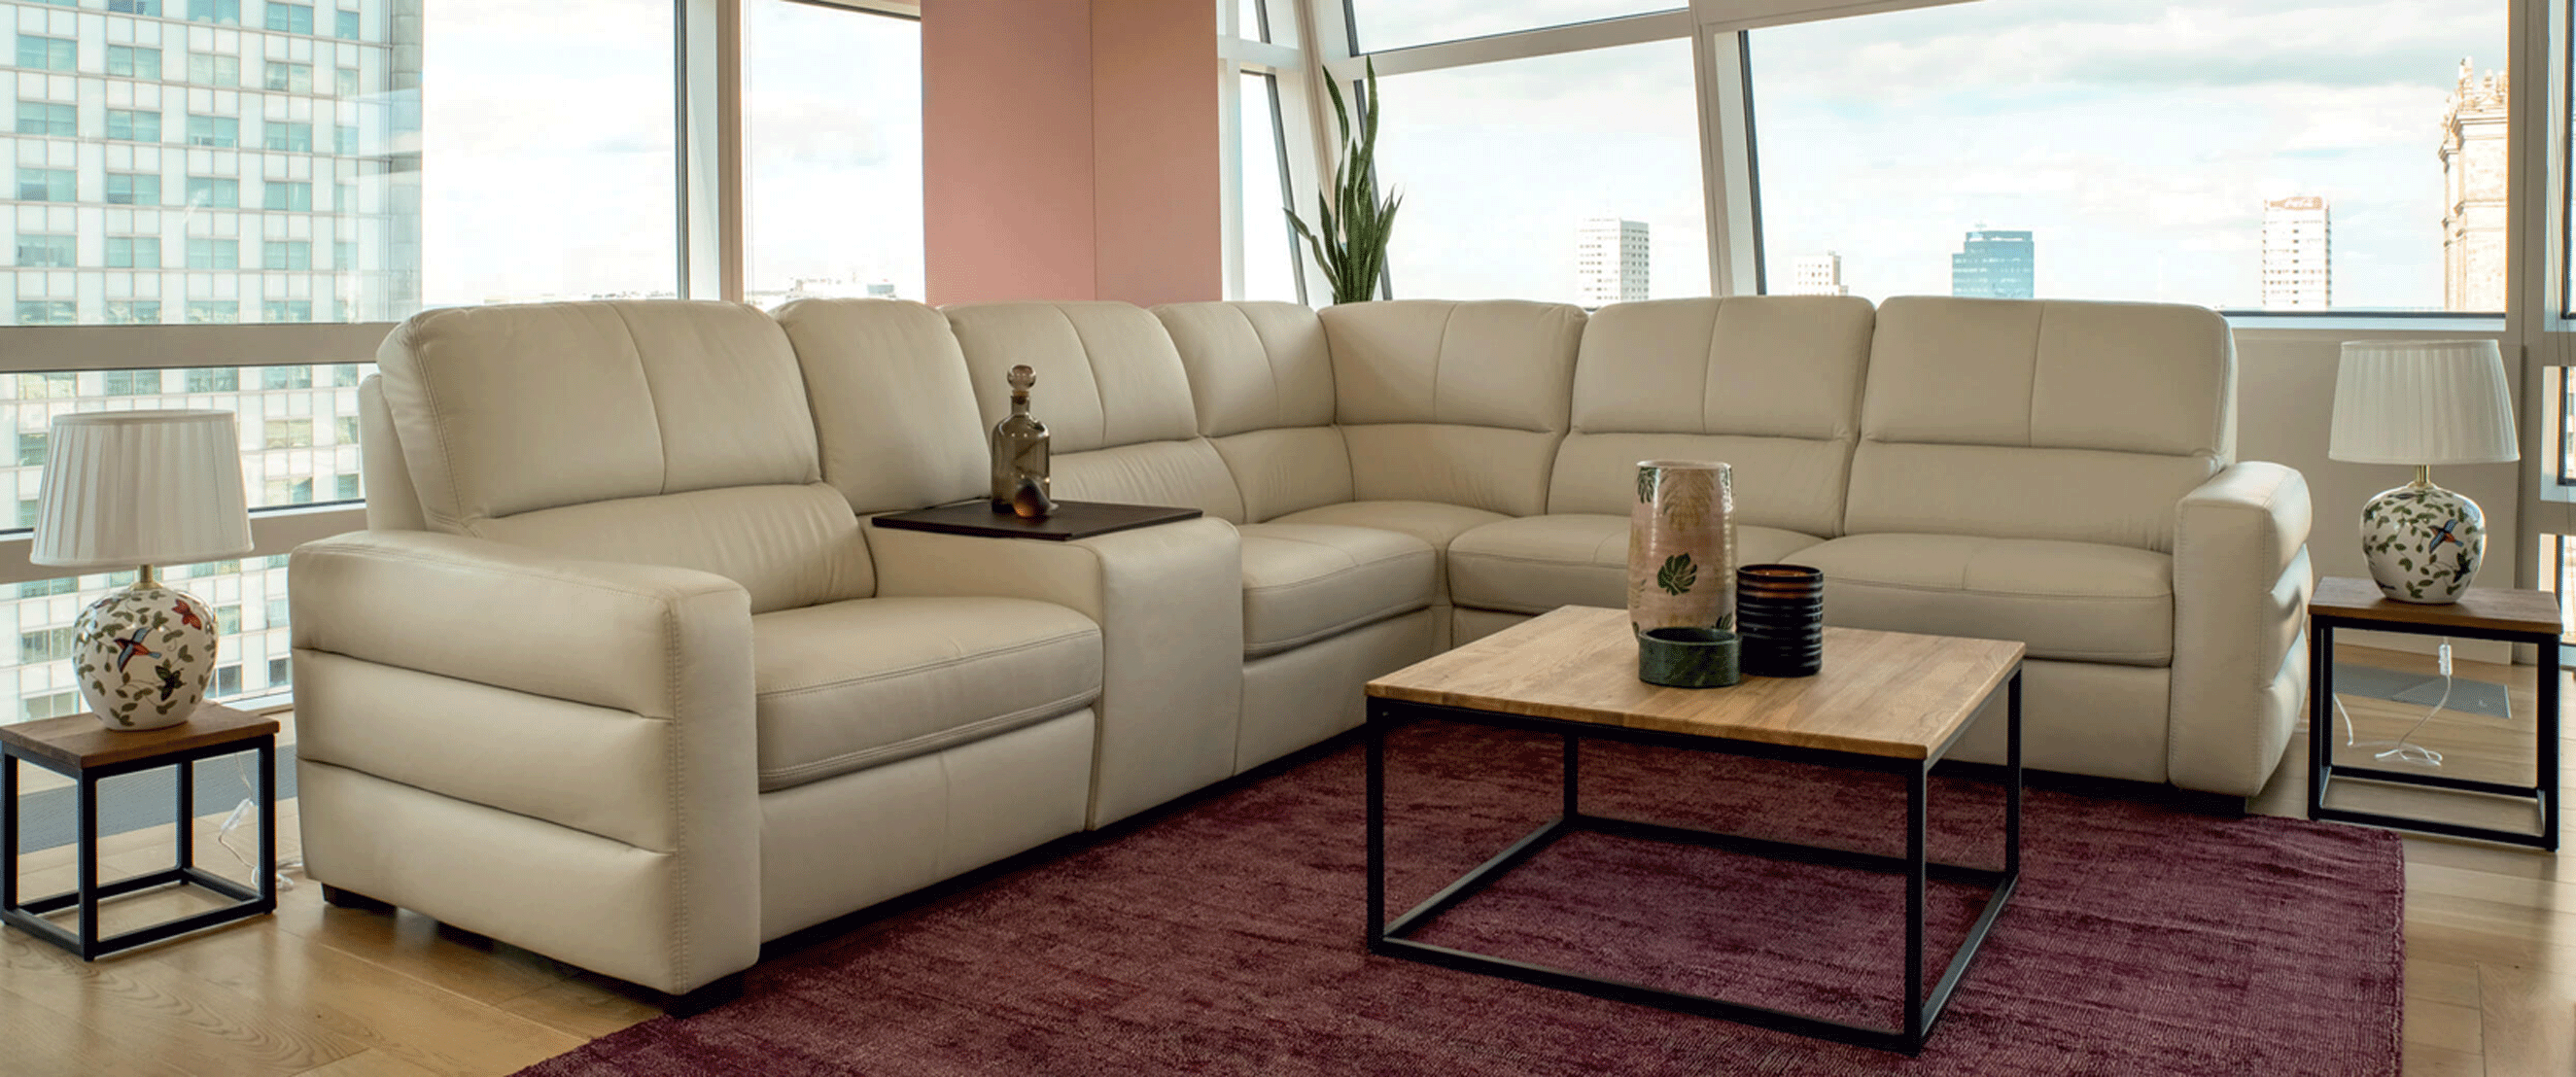 Brands Status Modern Collections, Italy Karten Sectional